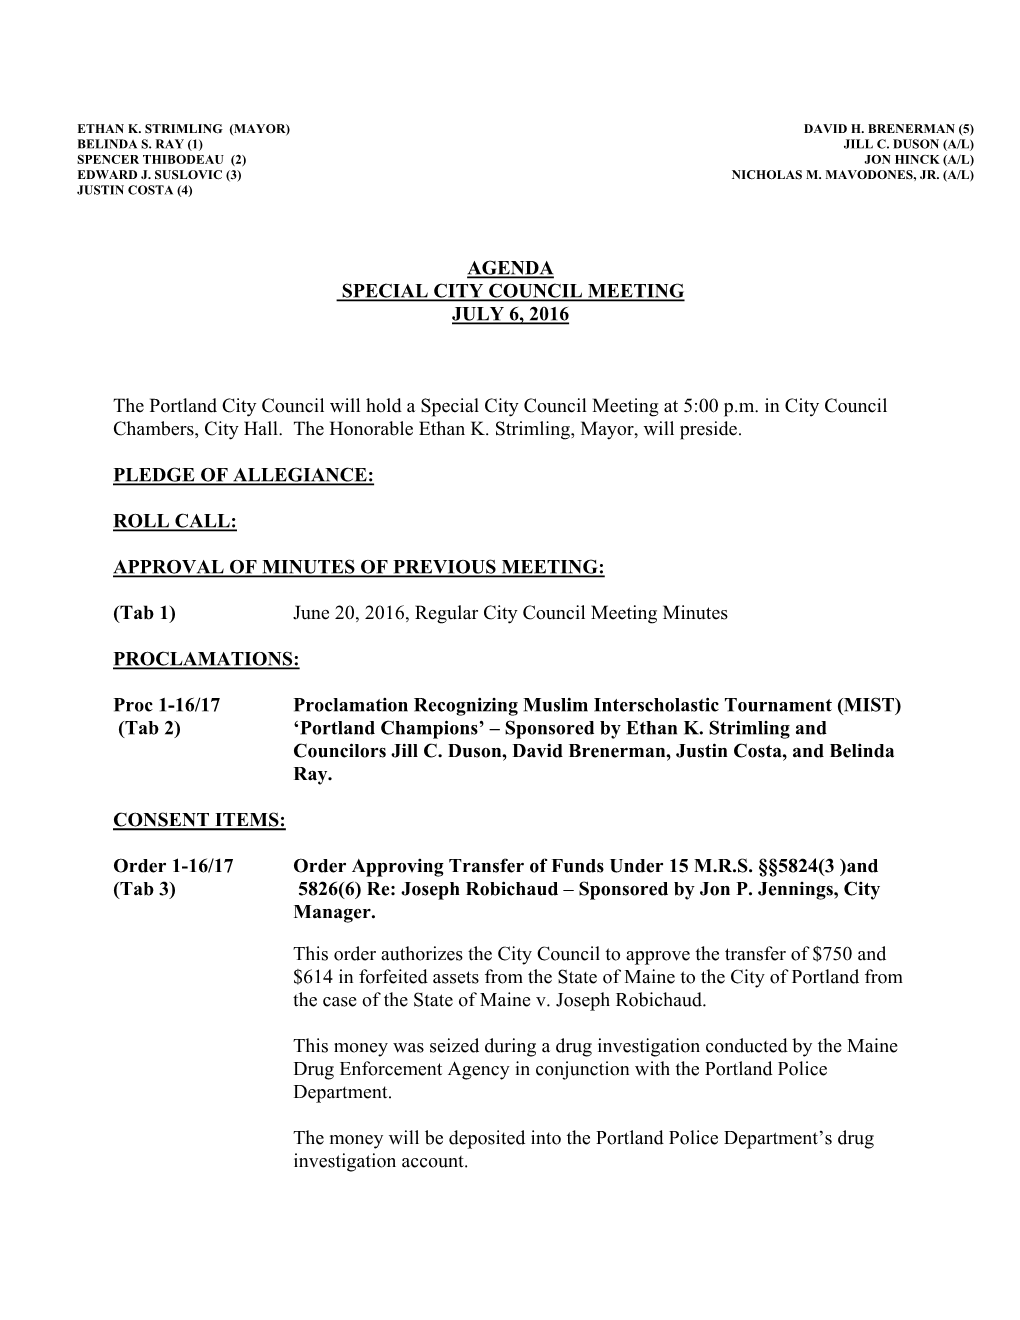 AGENDA SPECIAL CITY COUNCIL MEETING JULY 6, 2016 The